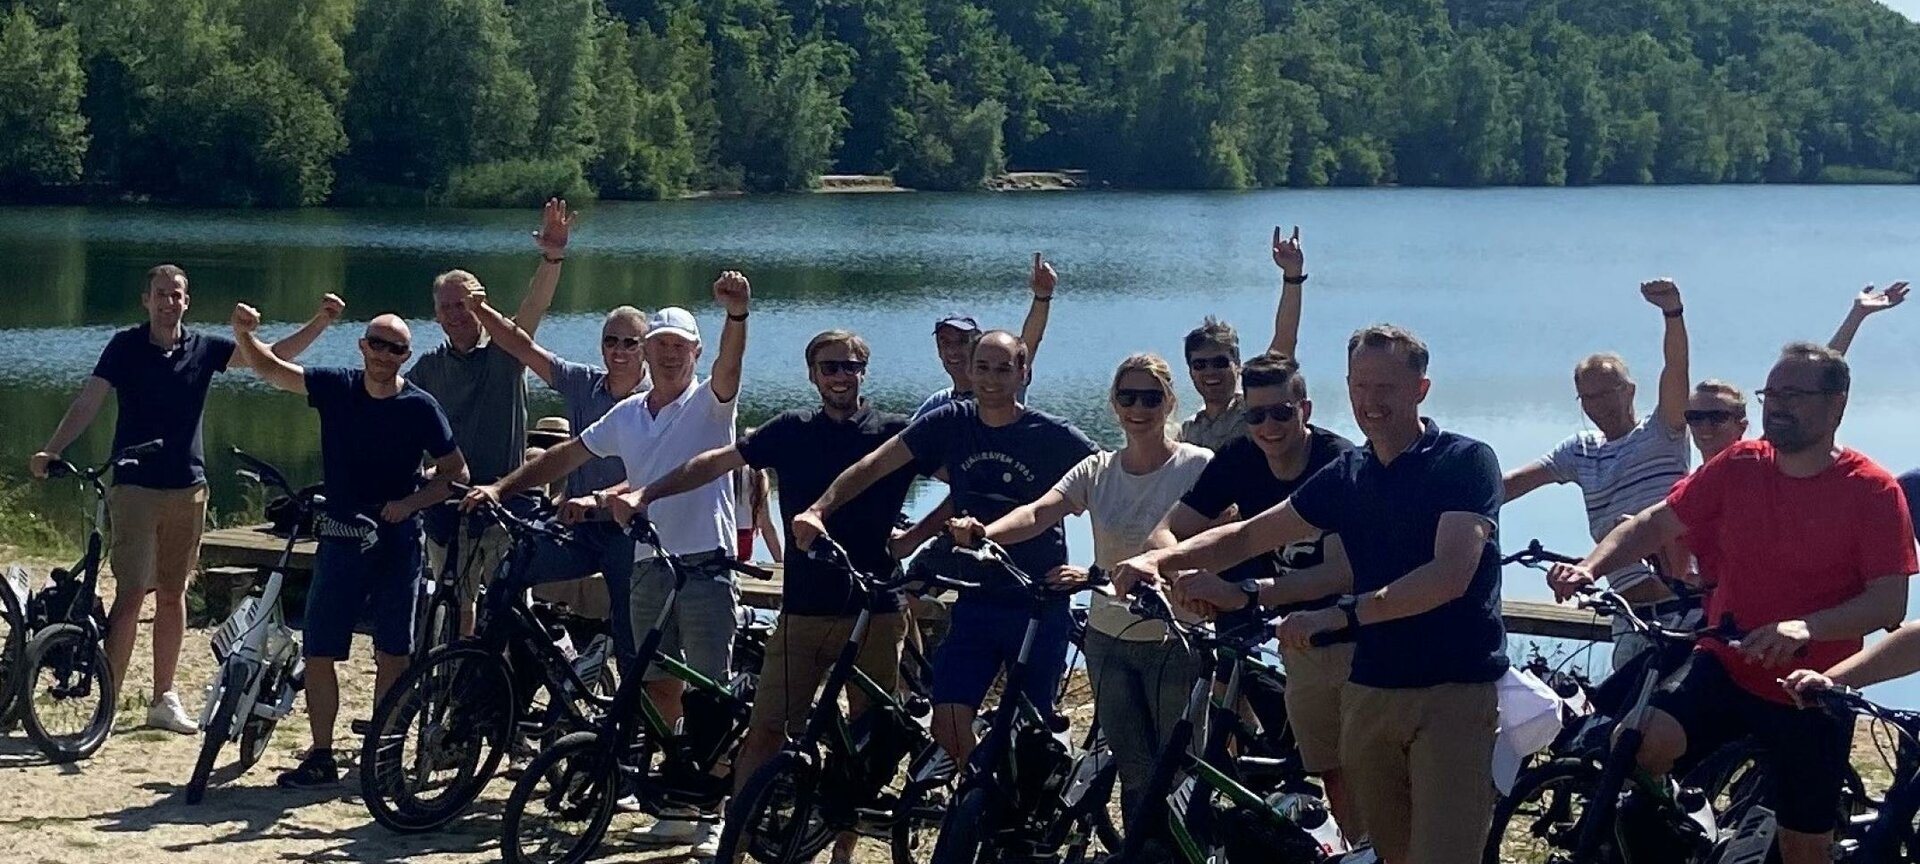 Bike & Outdoor Sport Center - Group with mixed fleet of bicycles, E-bikes and Streetsteppers